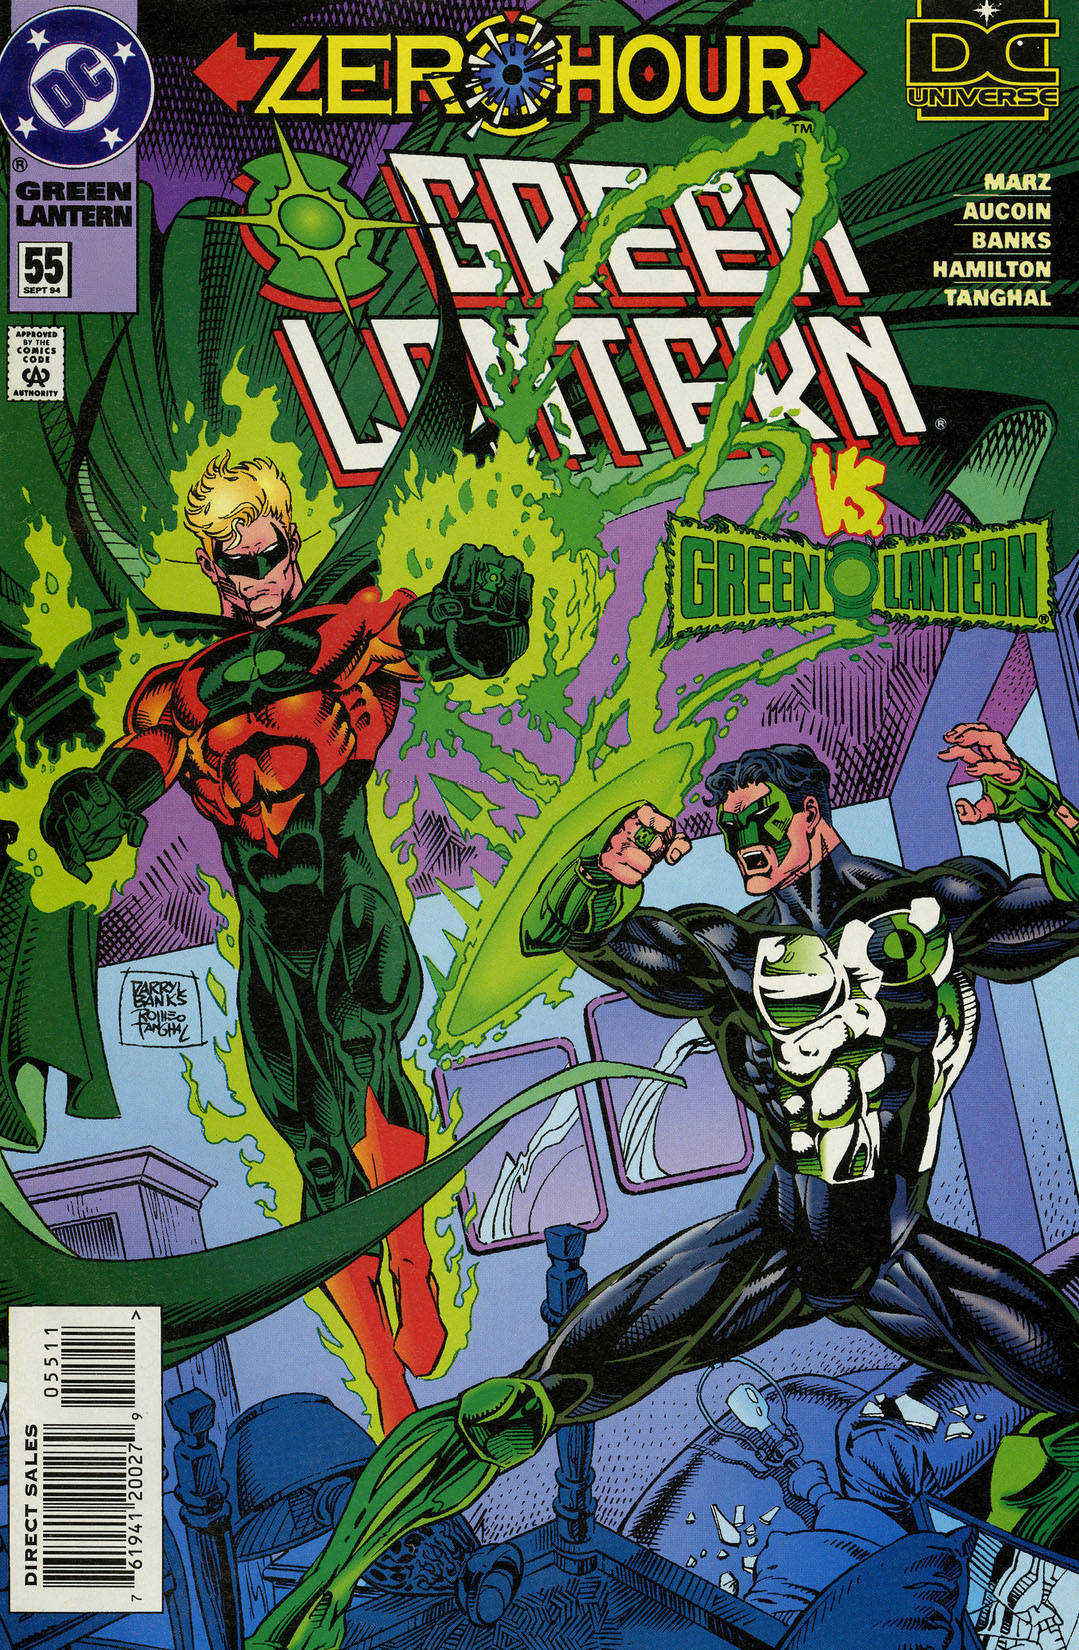 Green Lantern (1990-) #55 preview images